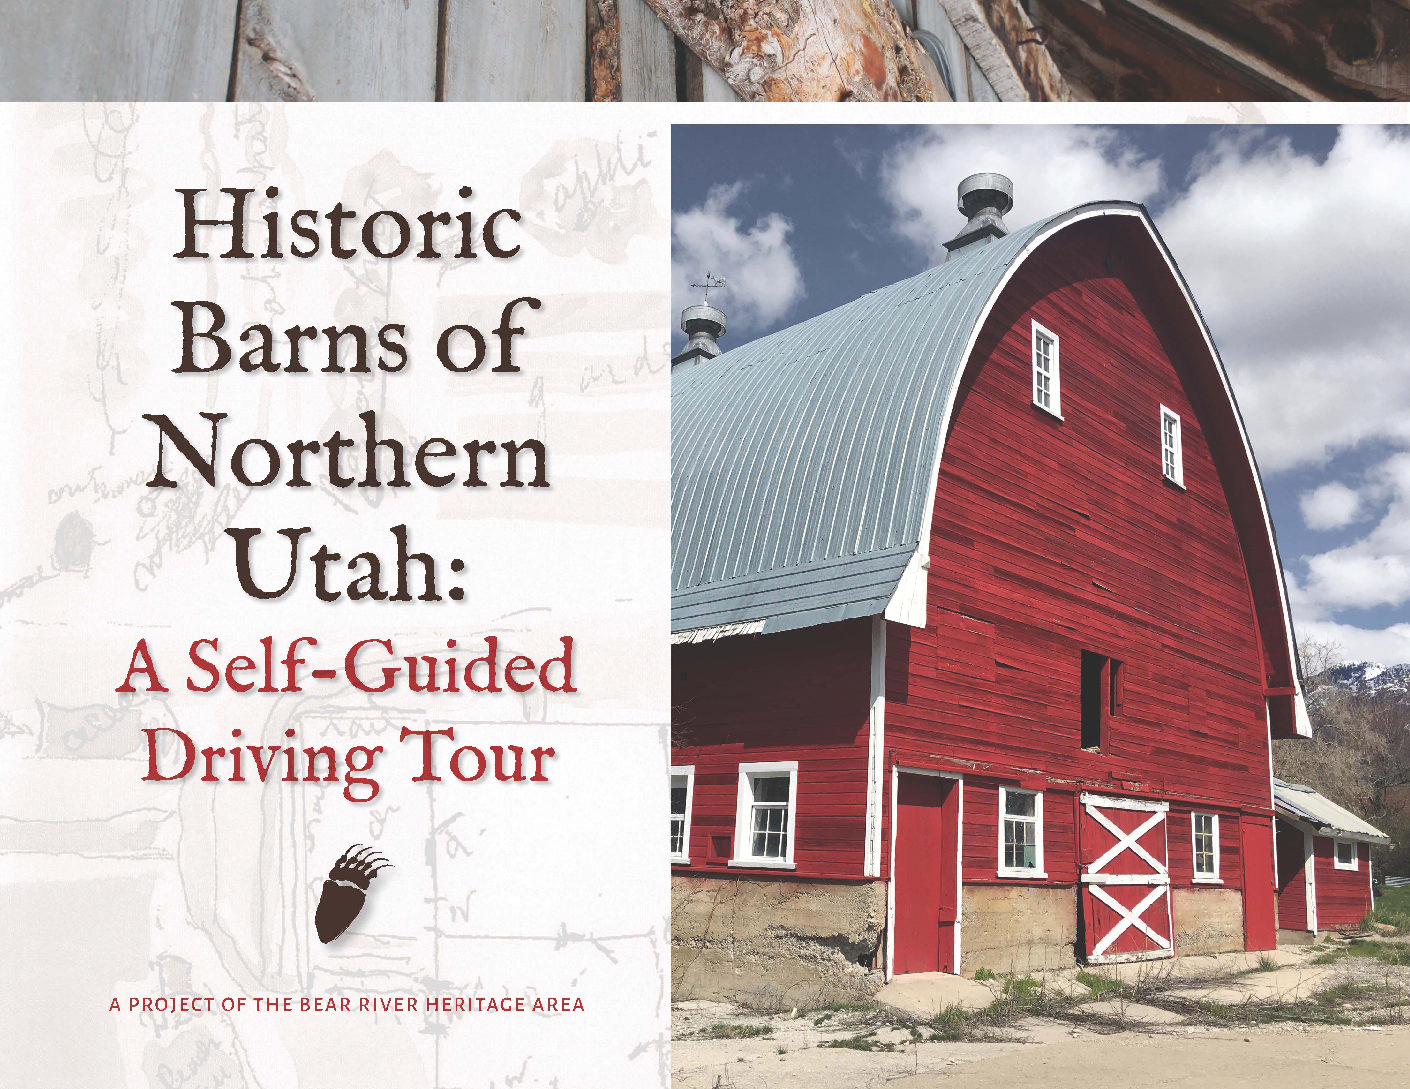 2017 Edition of Historic Barns of Northern Utah: A Self-Guided Driving Tour